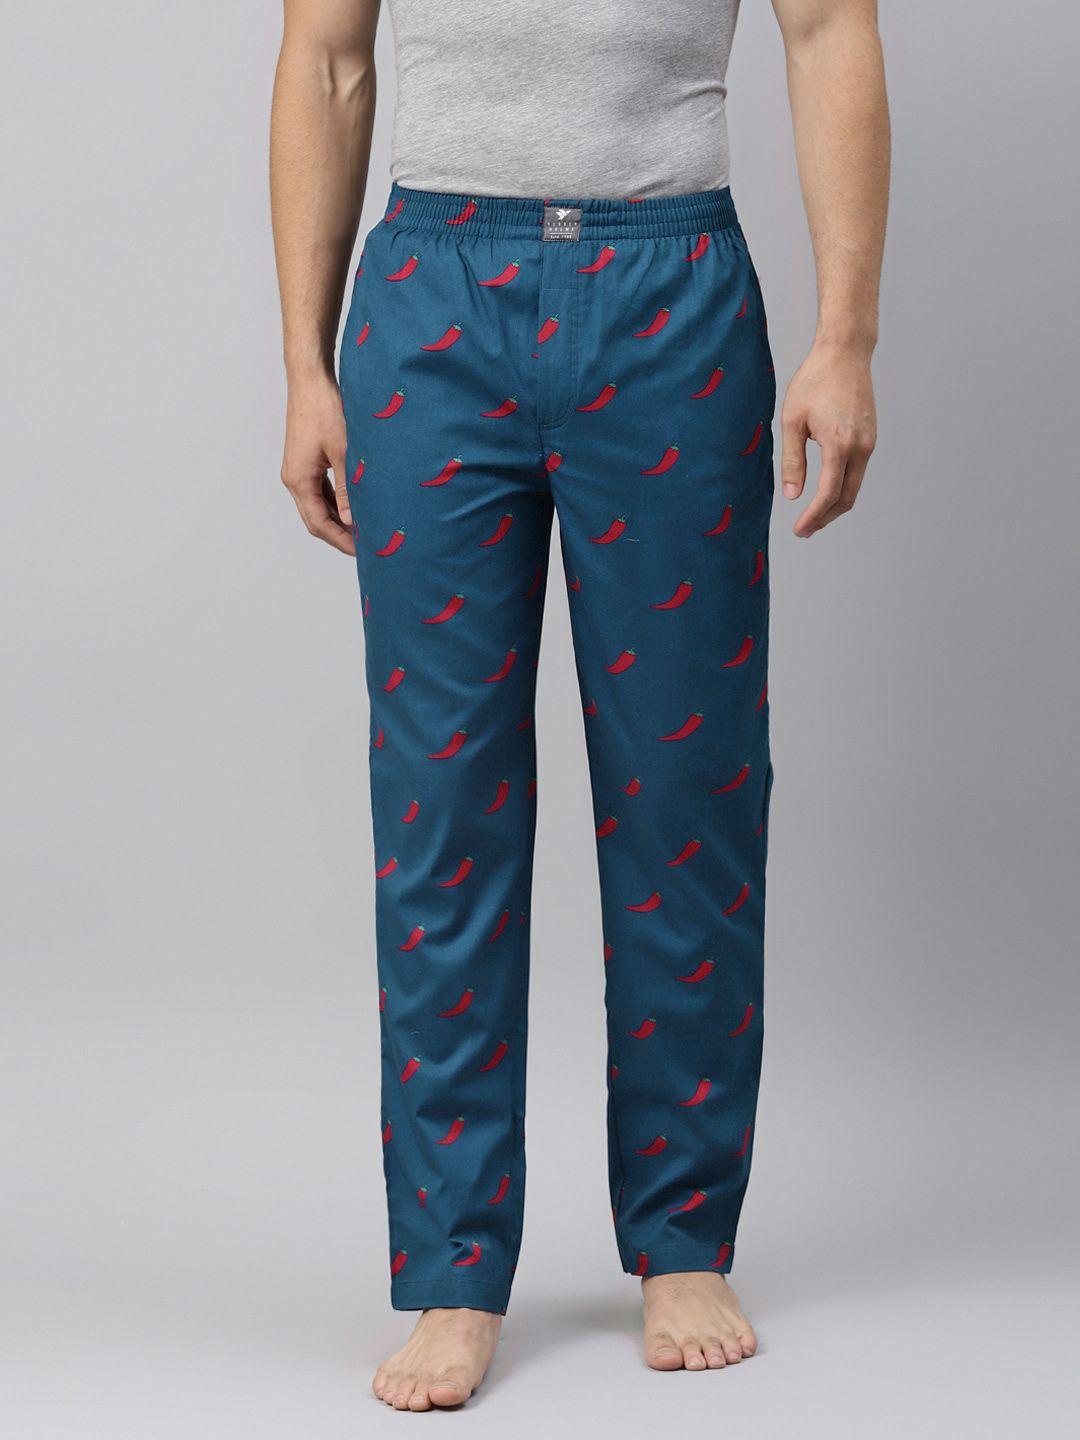 hubberholme men teal blue & red conversational printed pure cotton straight lounge pants